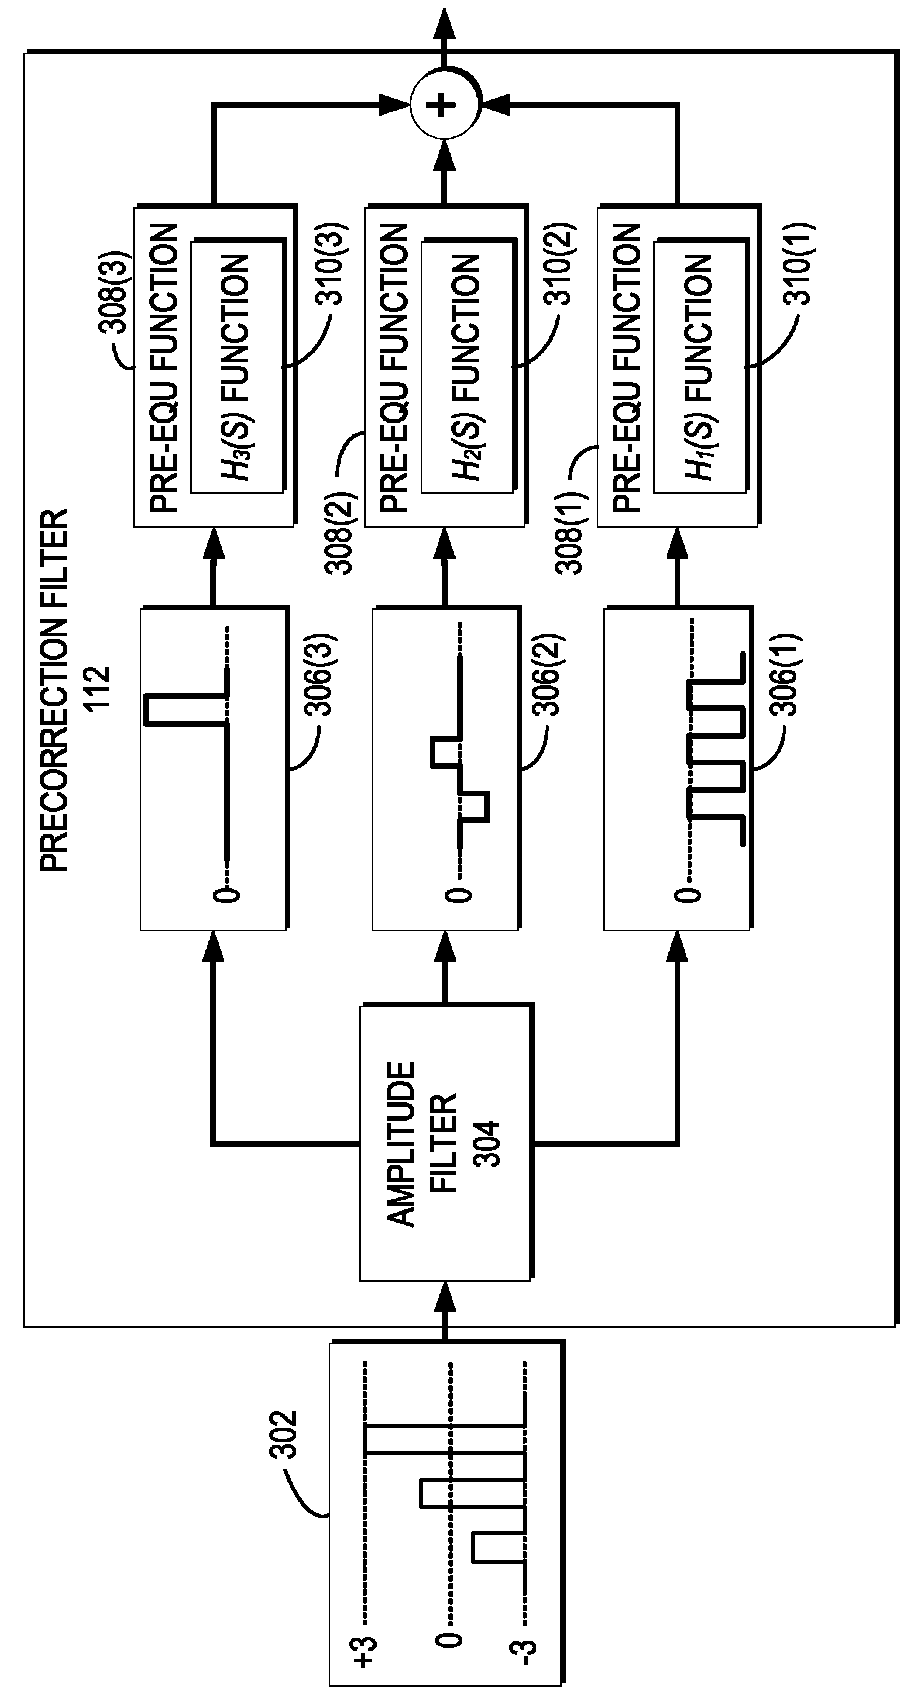 Electrical mitigation of DML nonlinearity for high-speed optical interconnection